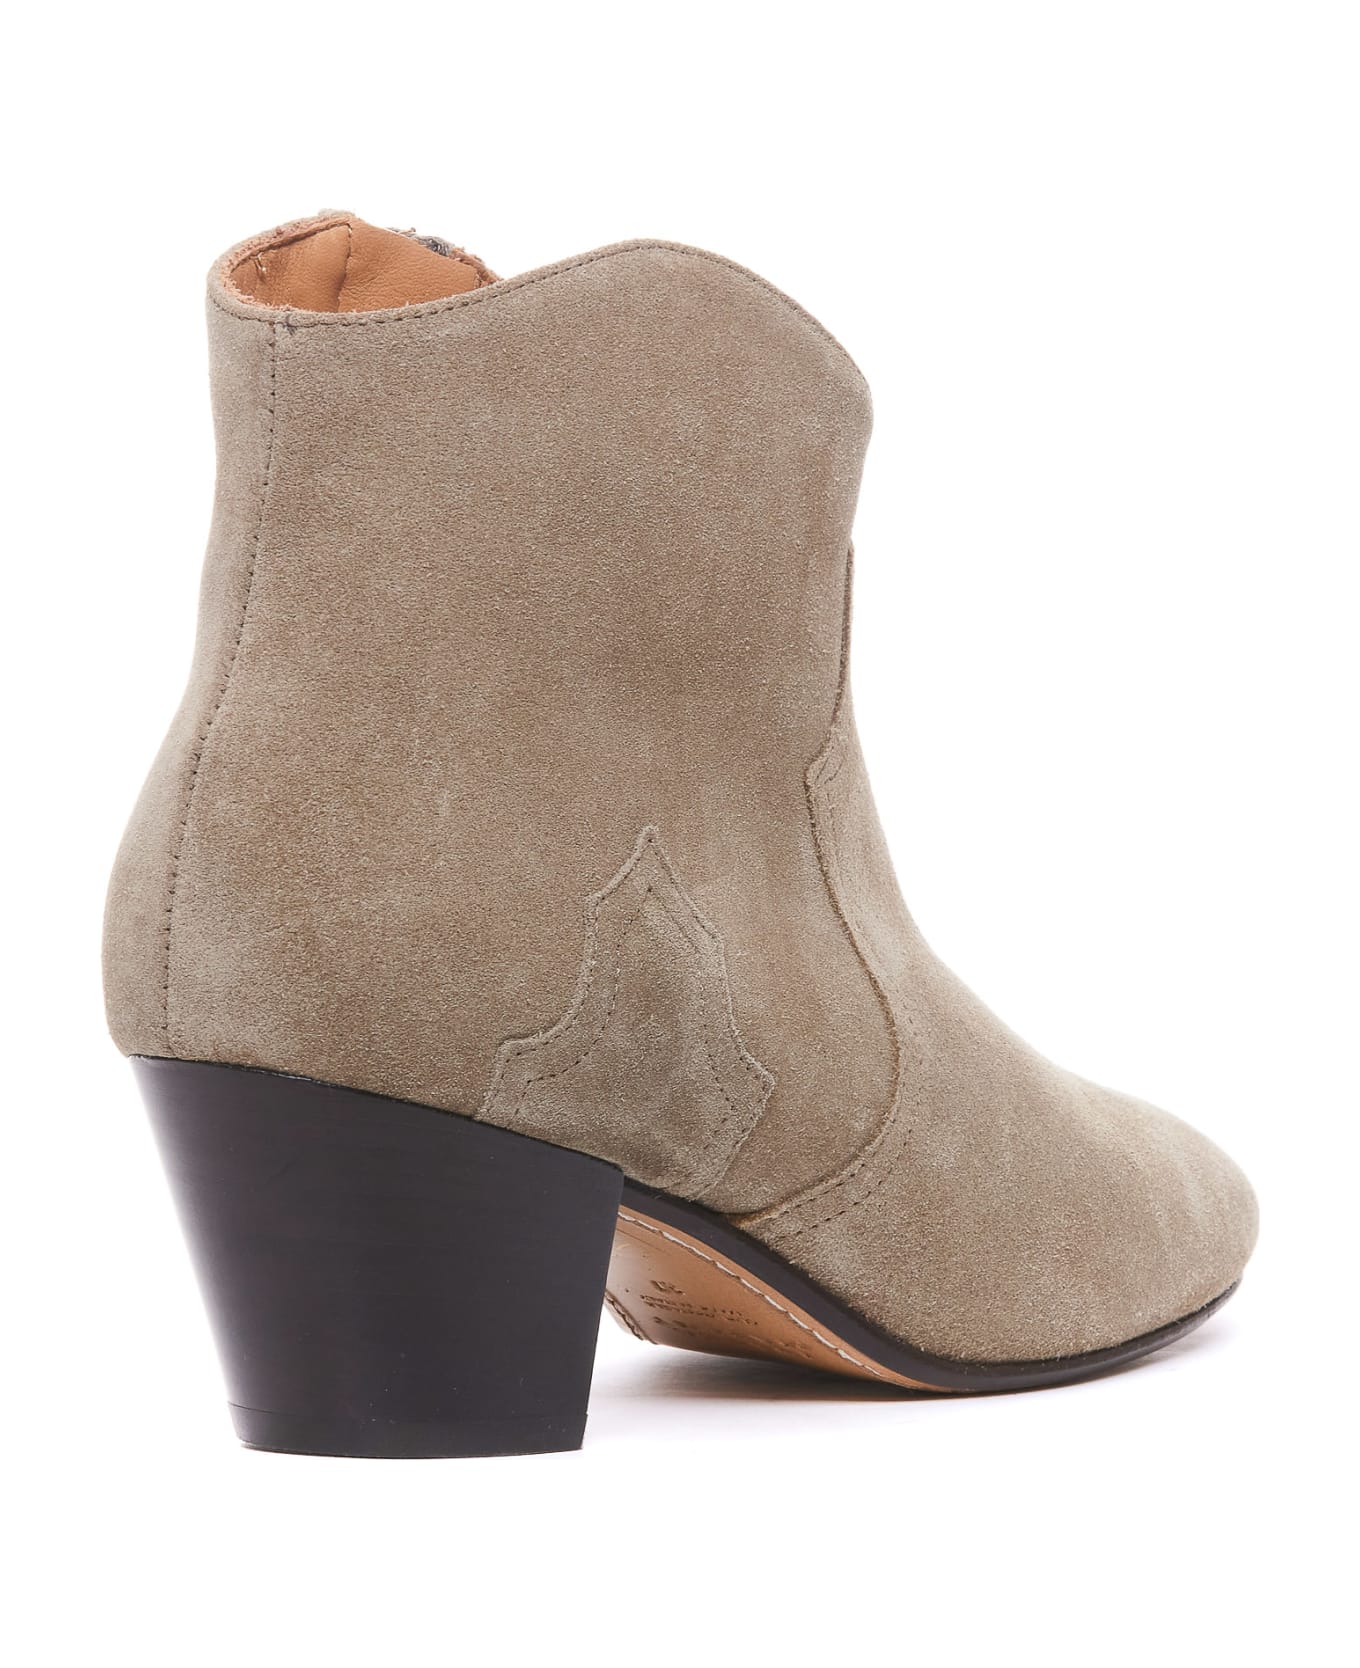 Isabel Marant Dicket Ankle Boots - Beige